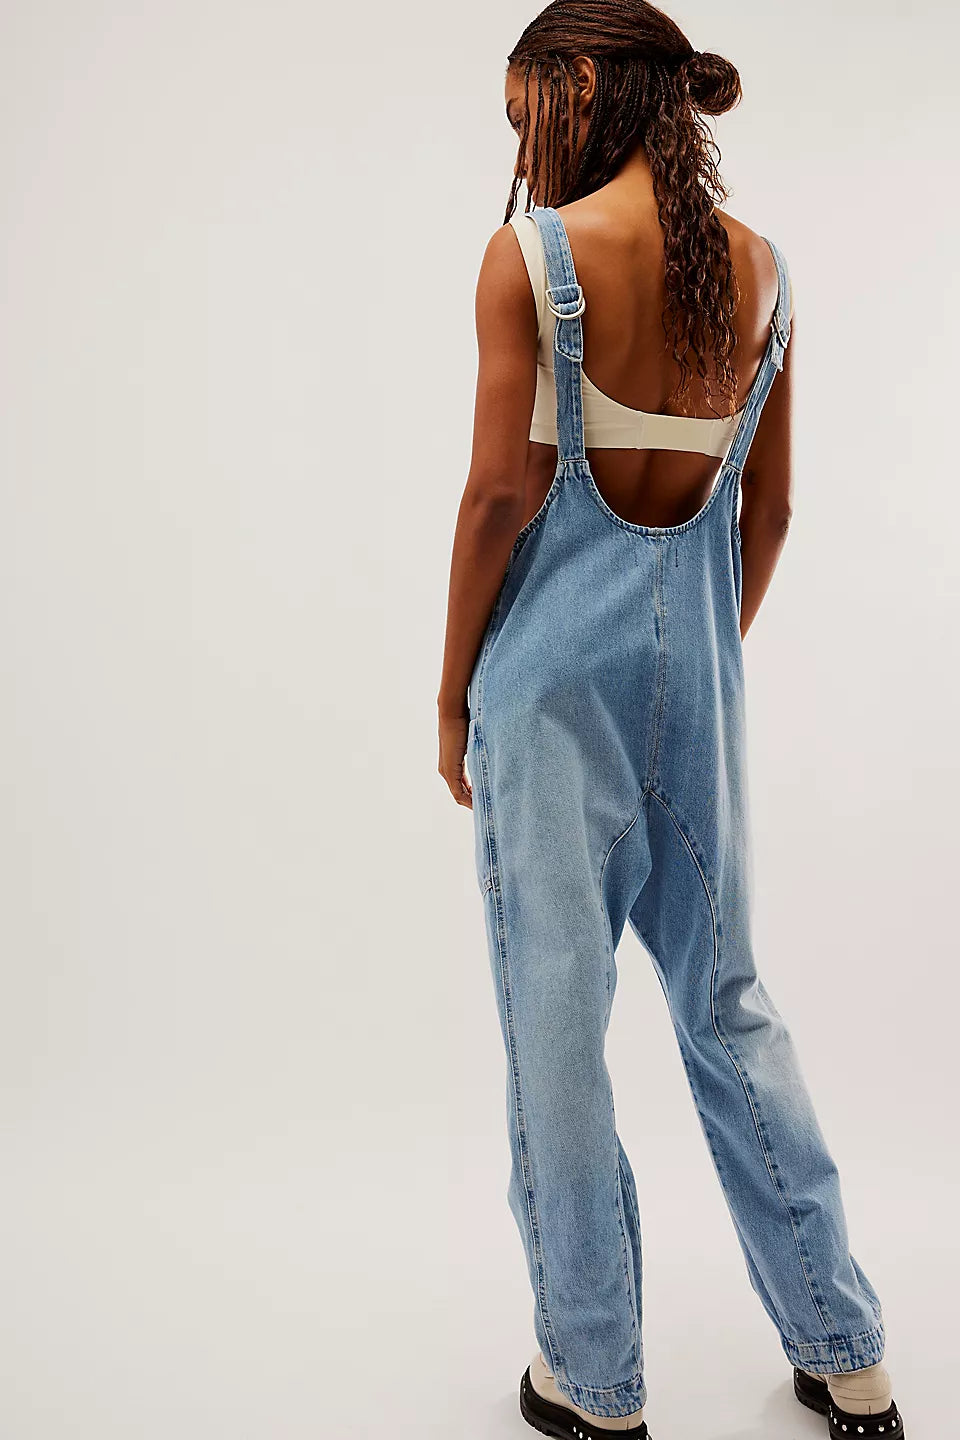 Free People We The Free High Roller Jumpsuit - KANSAS - Sun Diego Boardshop